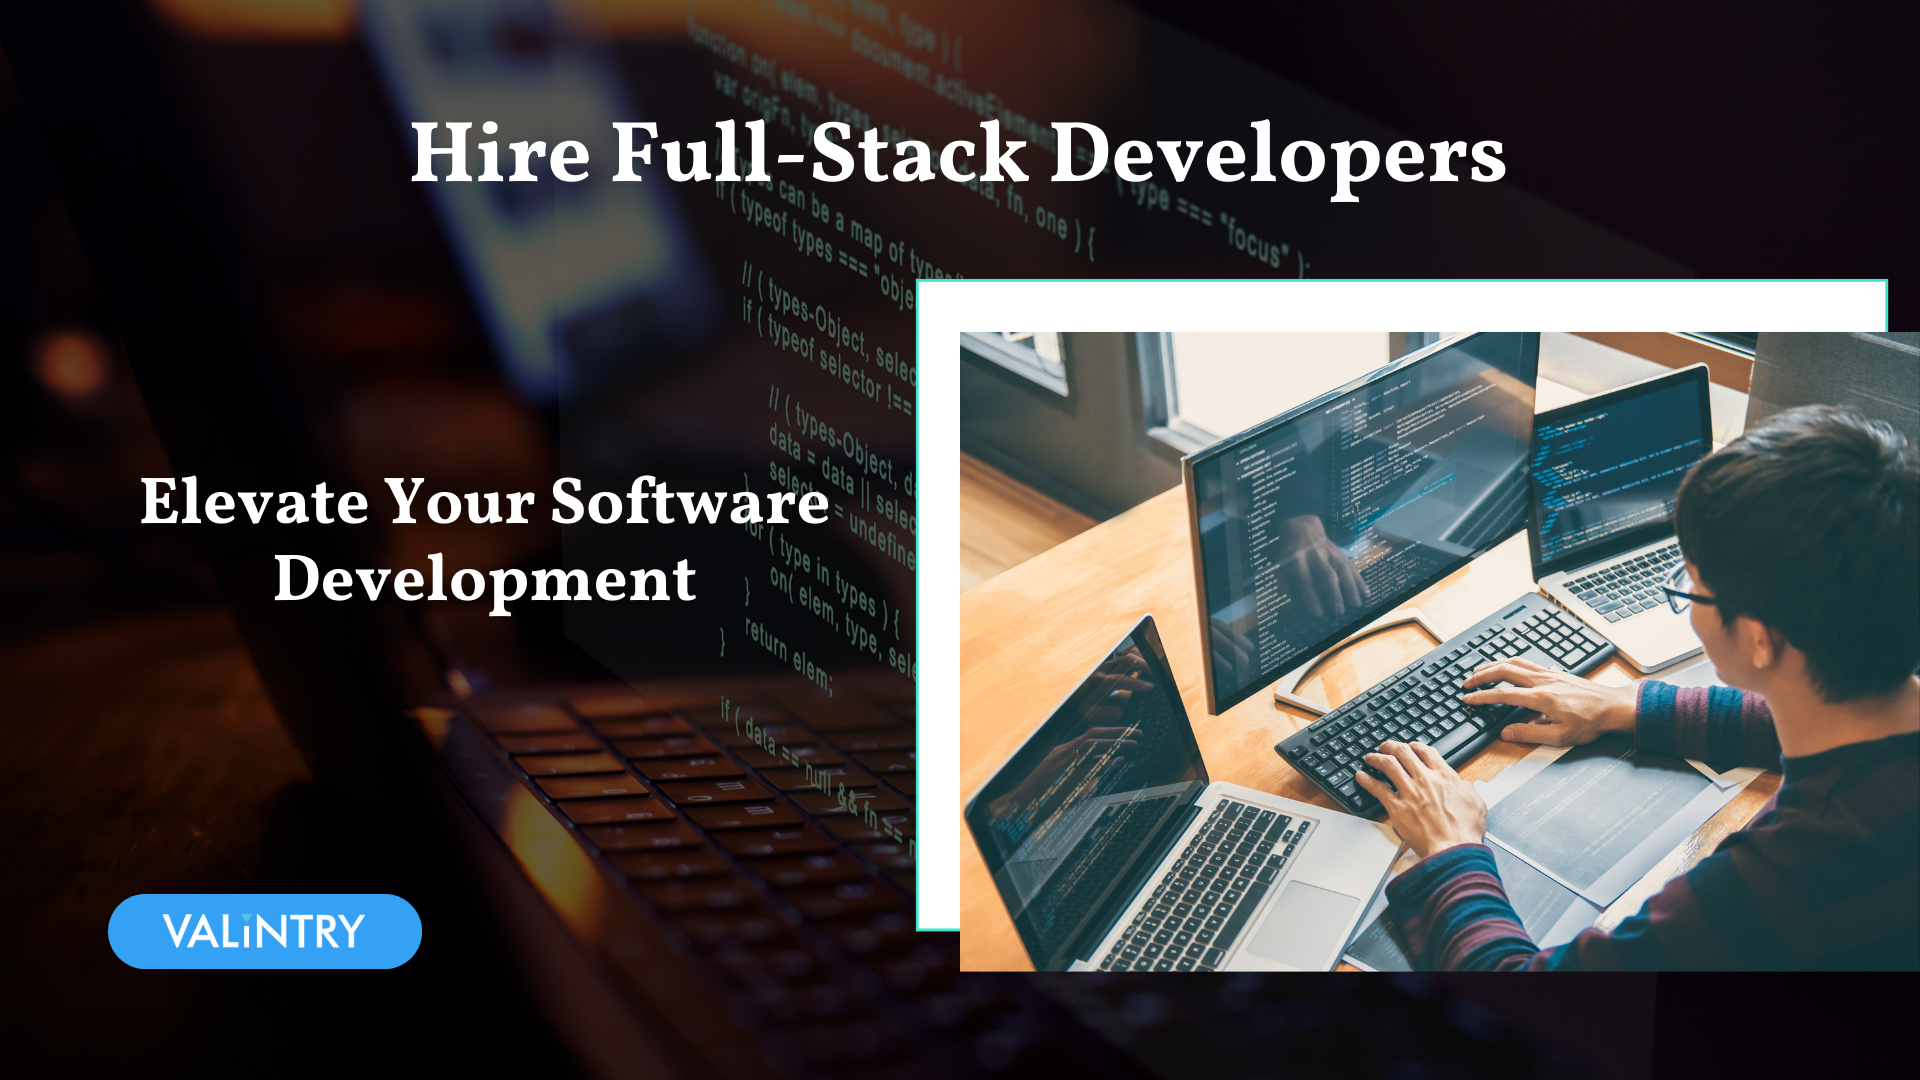 Hire Full-Stack Developers and Elevate Your Software Development - VALiNTRY